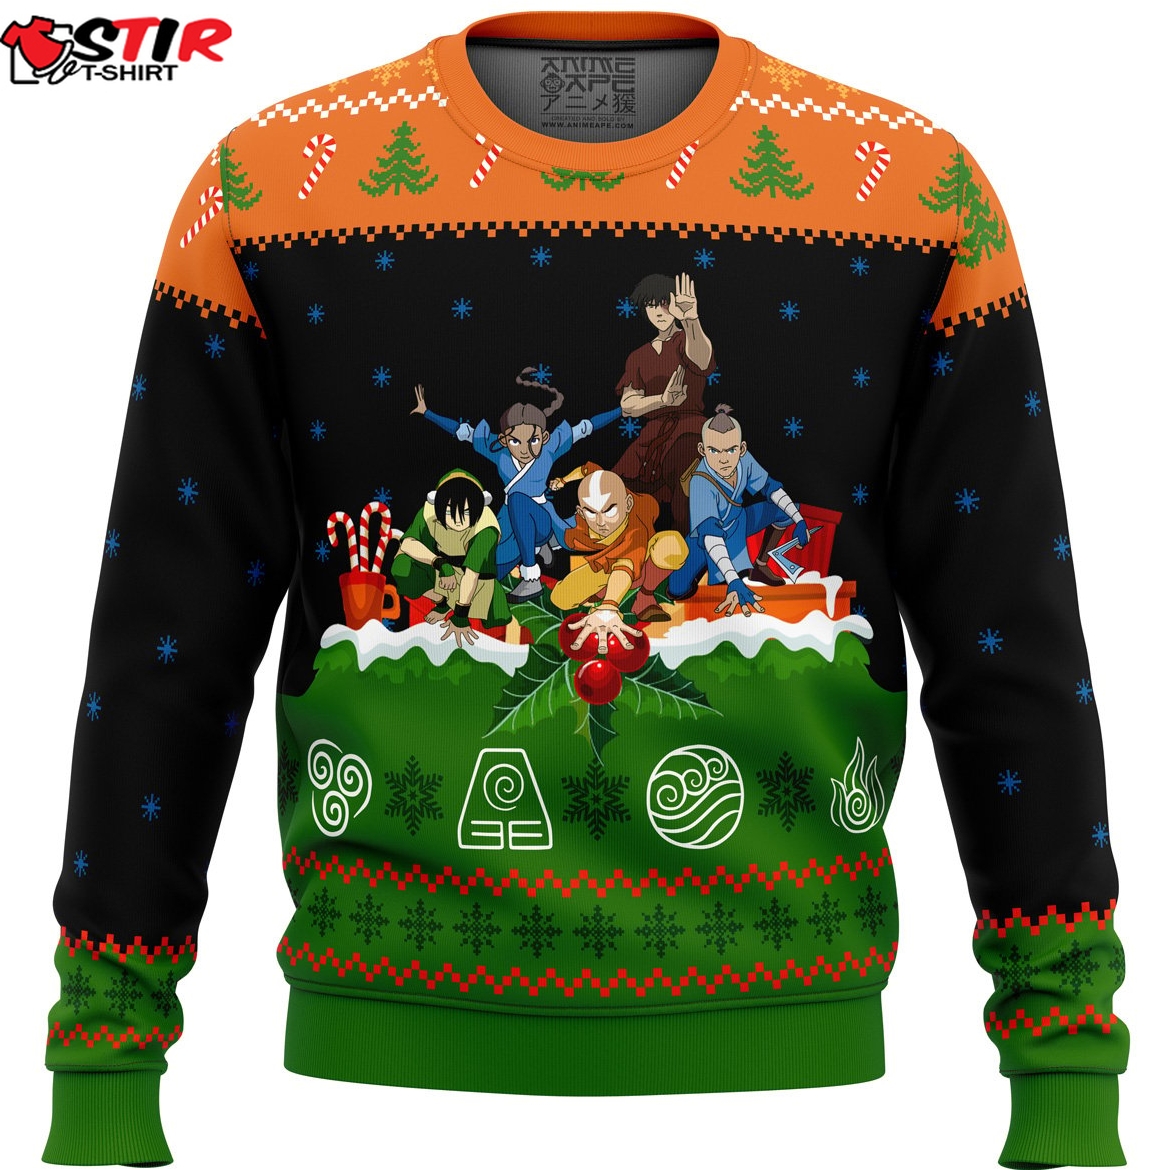 Avatar The Last Airbender On The Chimney Top Ugly Christmas Sweater Stirtshirt